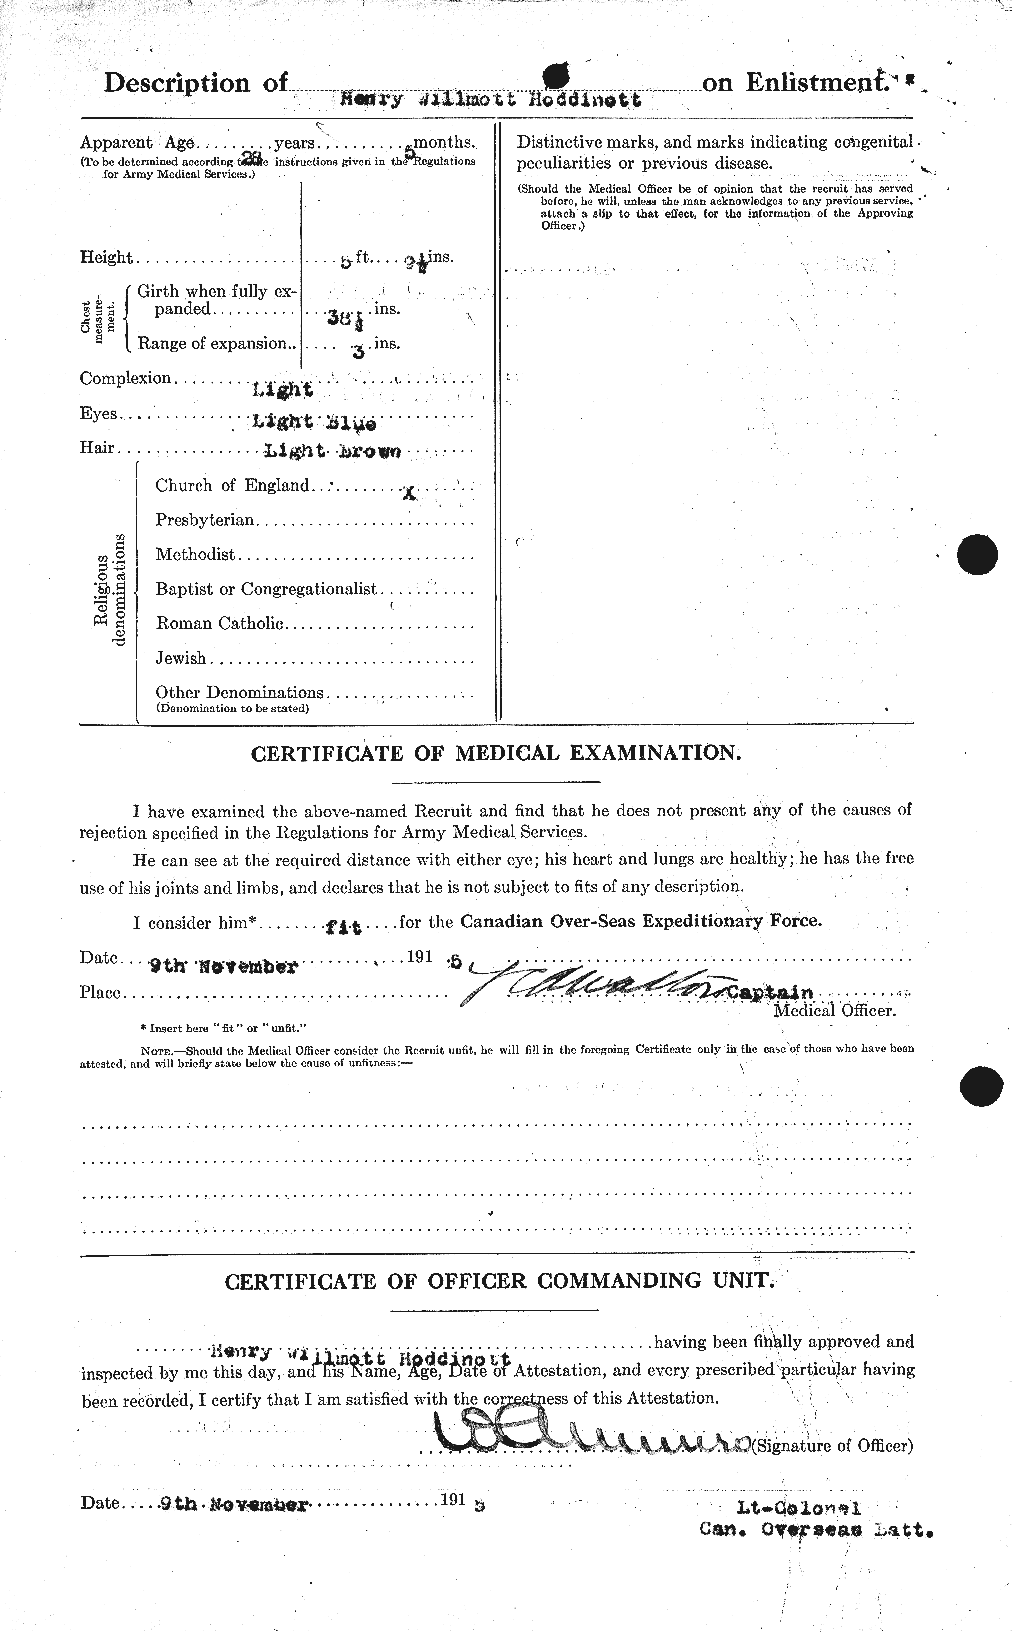 Personnel Records of the First World War - CEF 397812b